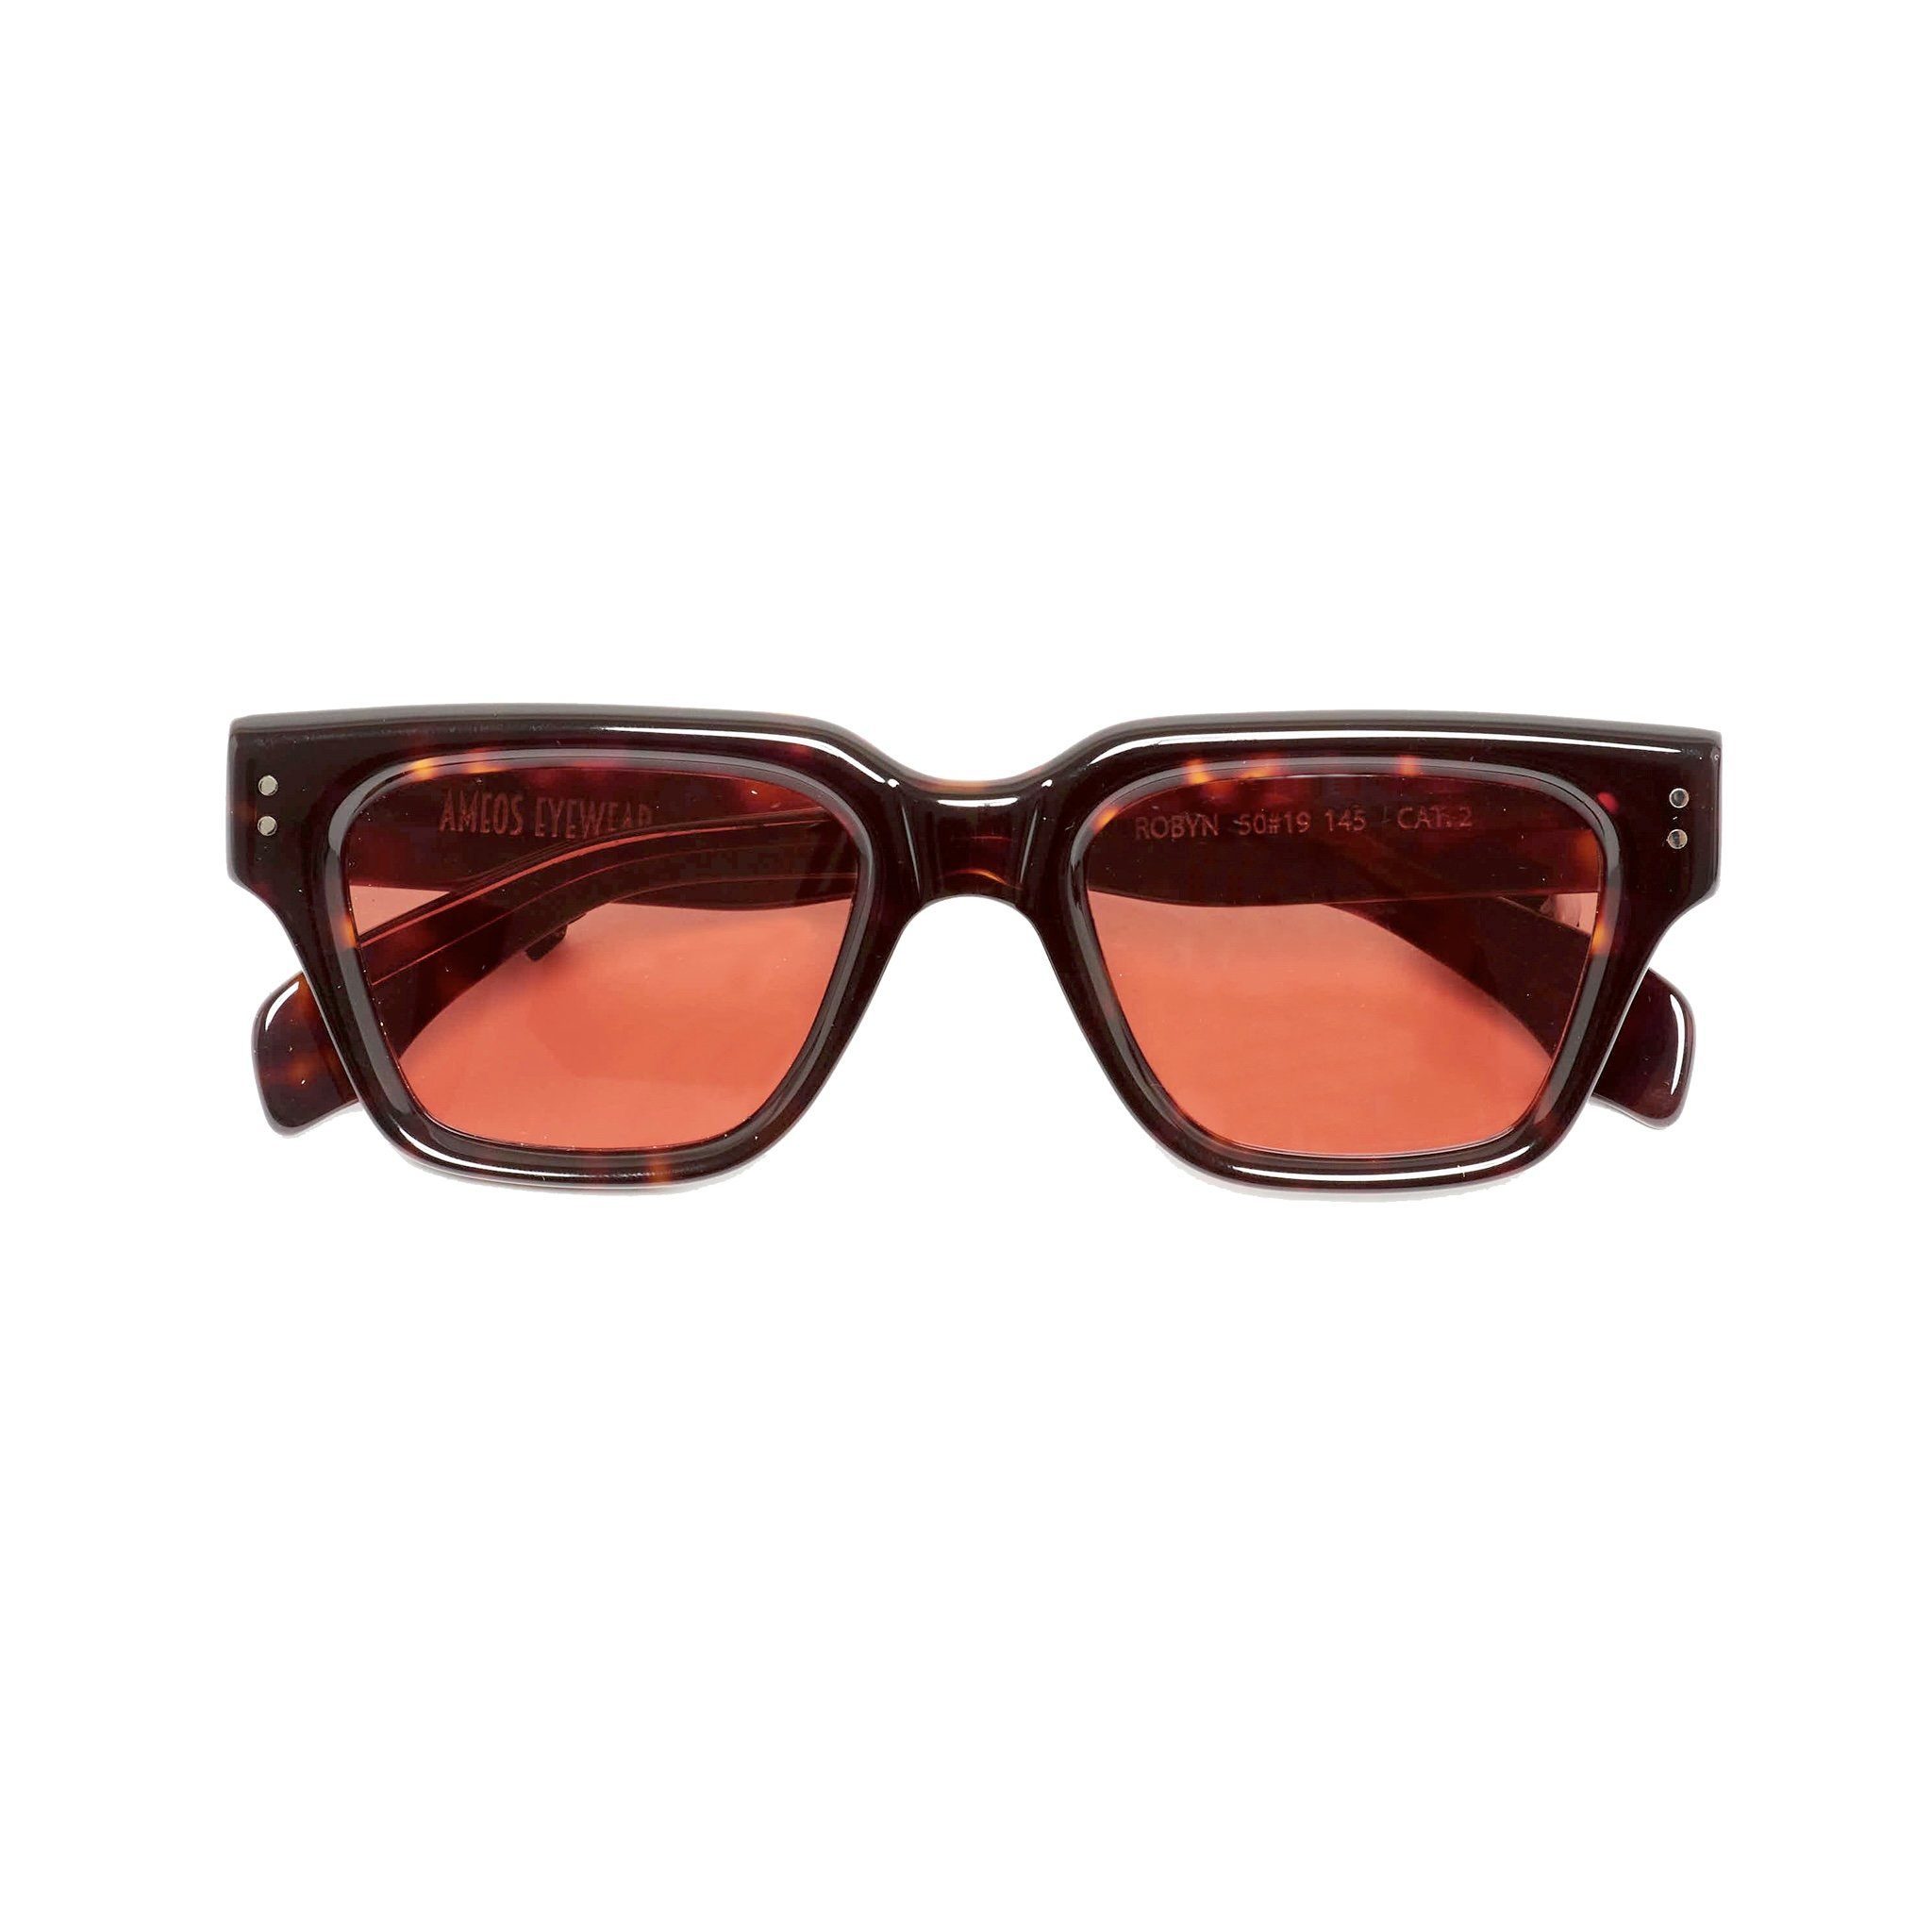 Tortoise frames sunglasses with red lenses. Front view temples crossed